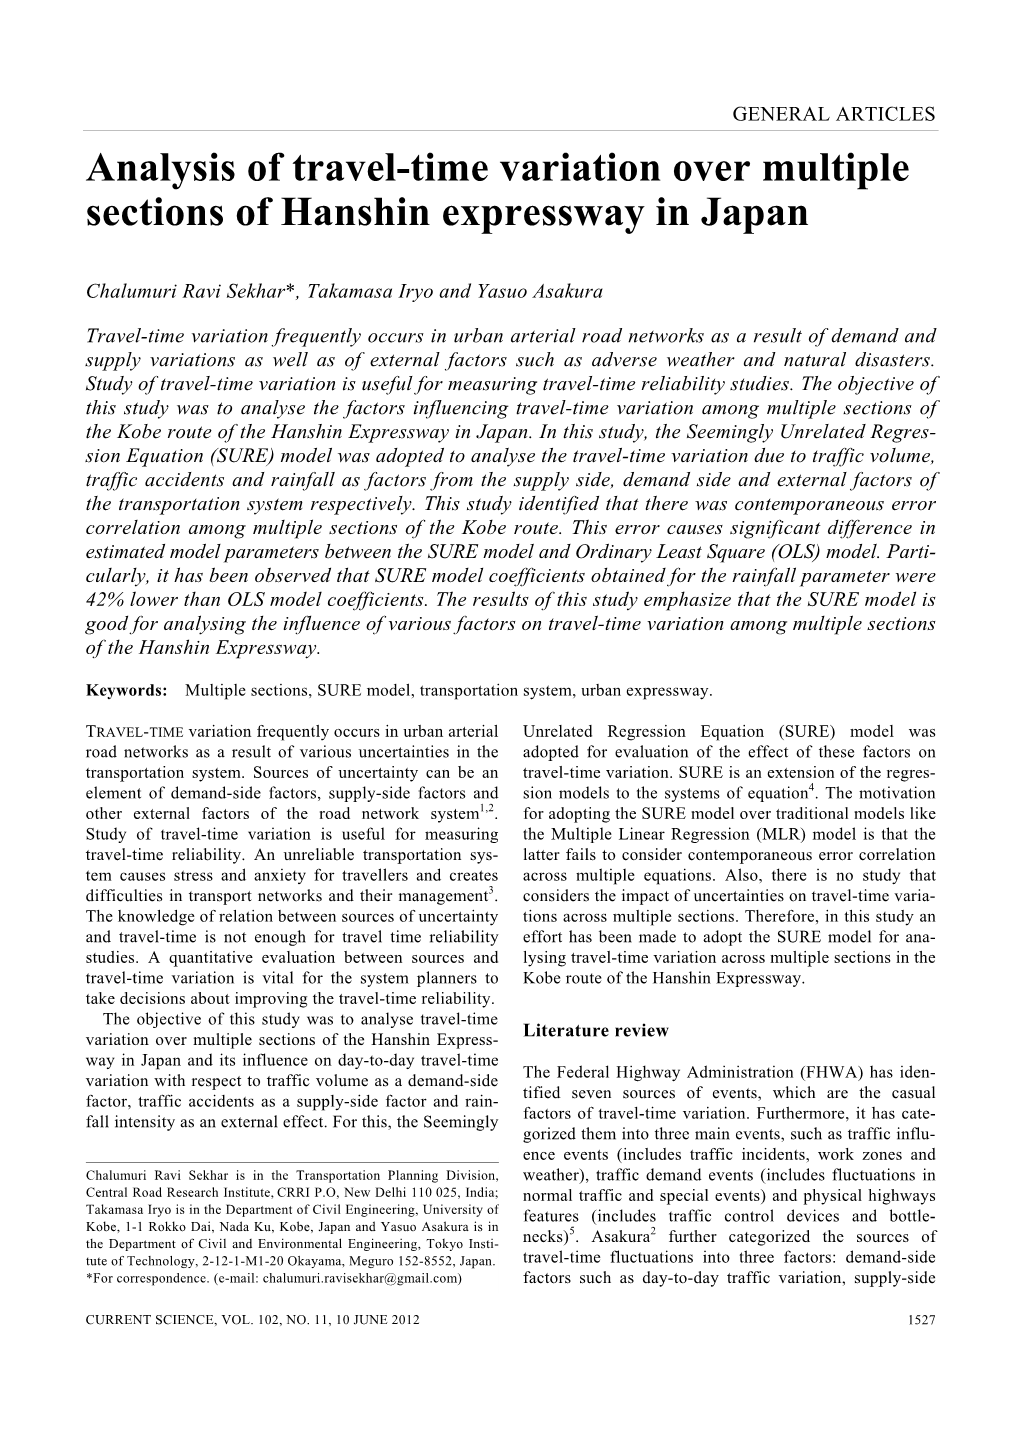 Analysis of Travel-Time Variation Over Multiple Sections of Hanshin Expressway in Japan